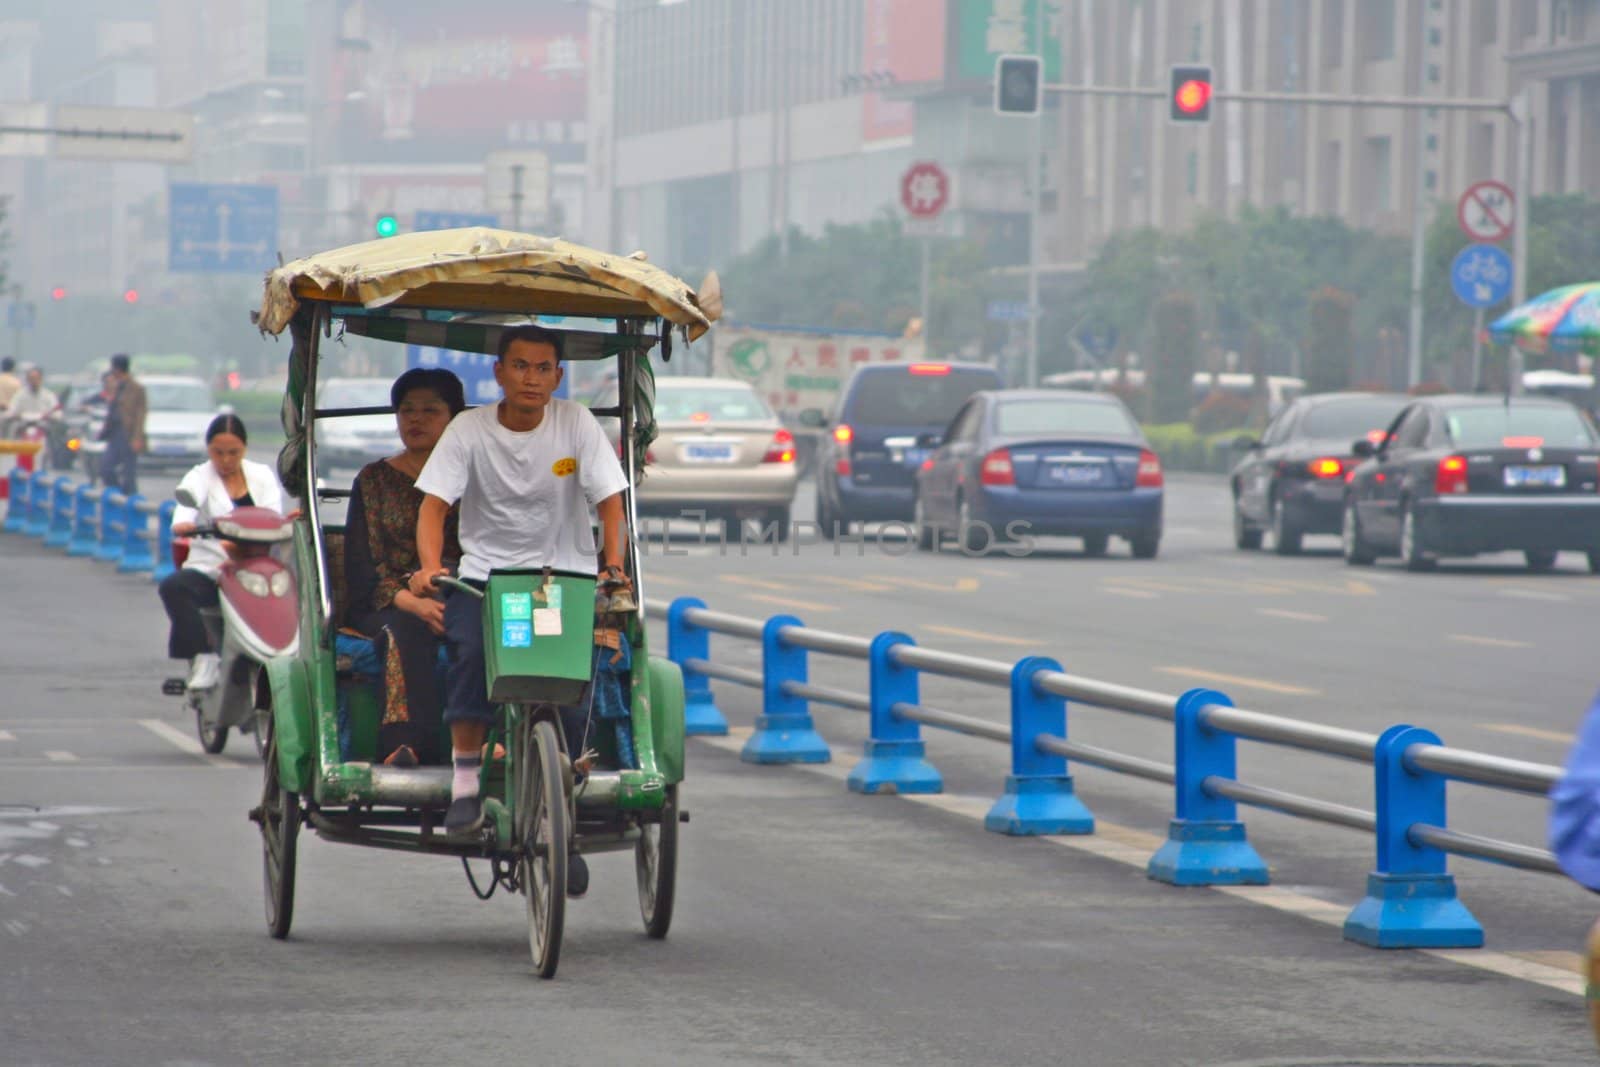 CHENGDU, CHINA - SEPTEMBER 16: Pedicab on the road on September 16, 2006 in Chengdu, Sichuan, China